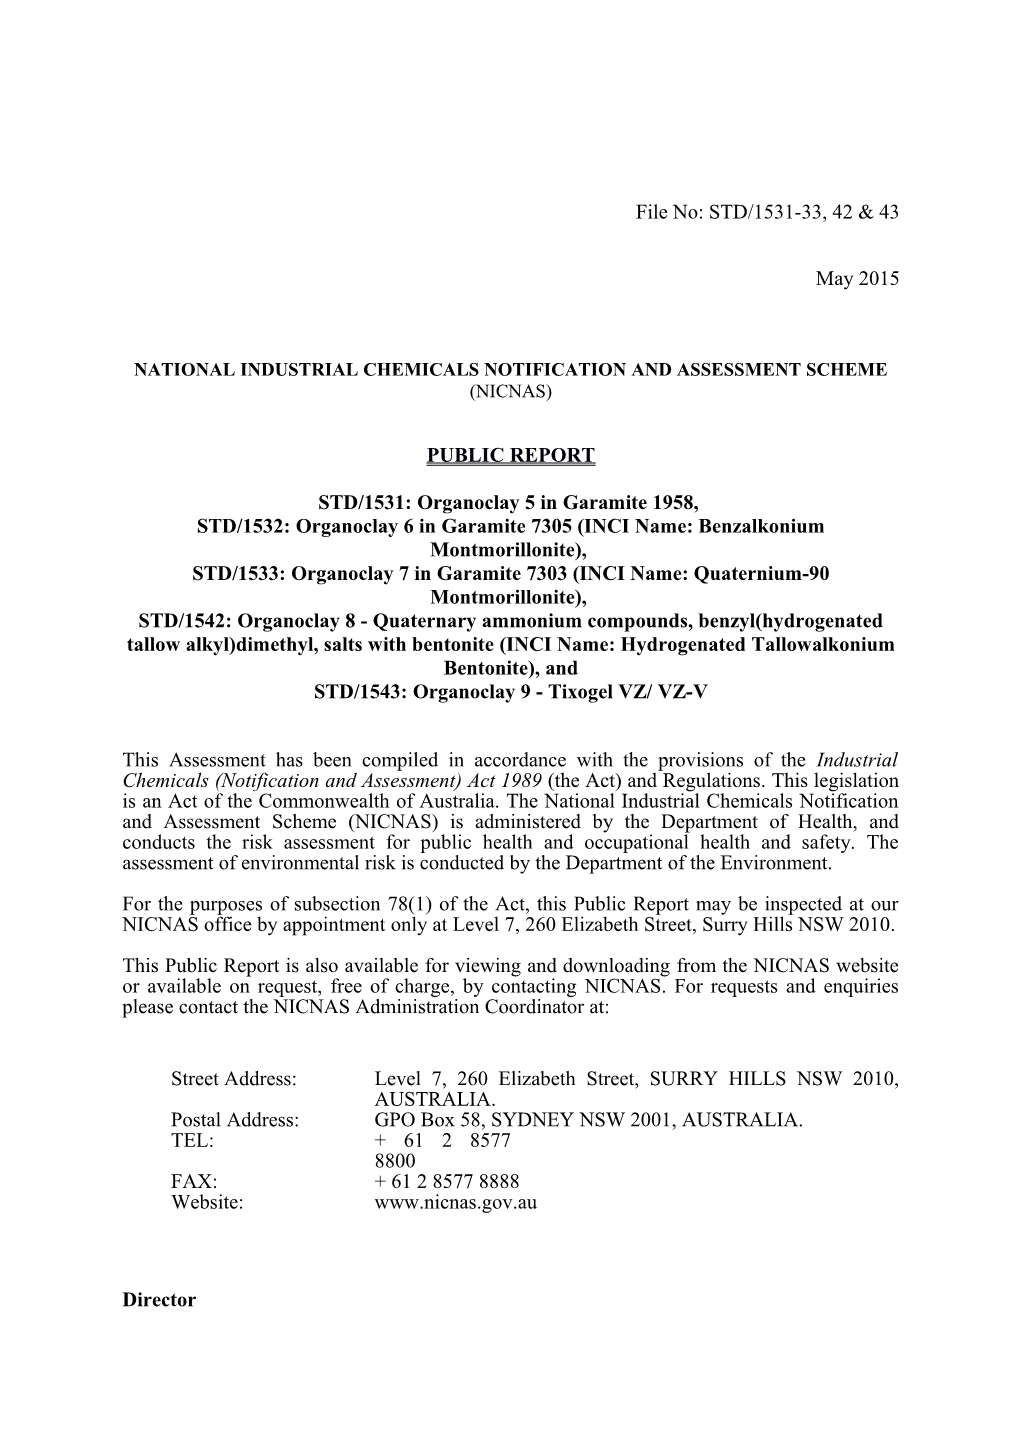 National Industrial Chemicals Notification and Assessment Scheme s53